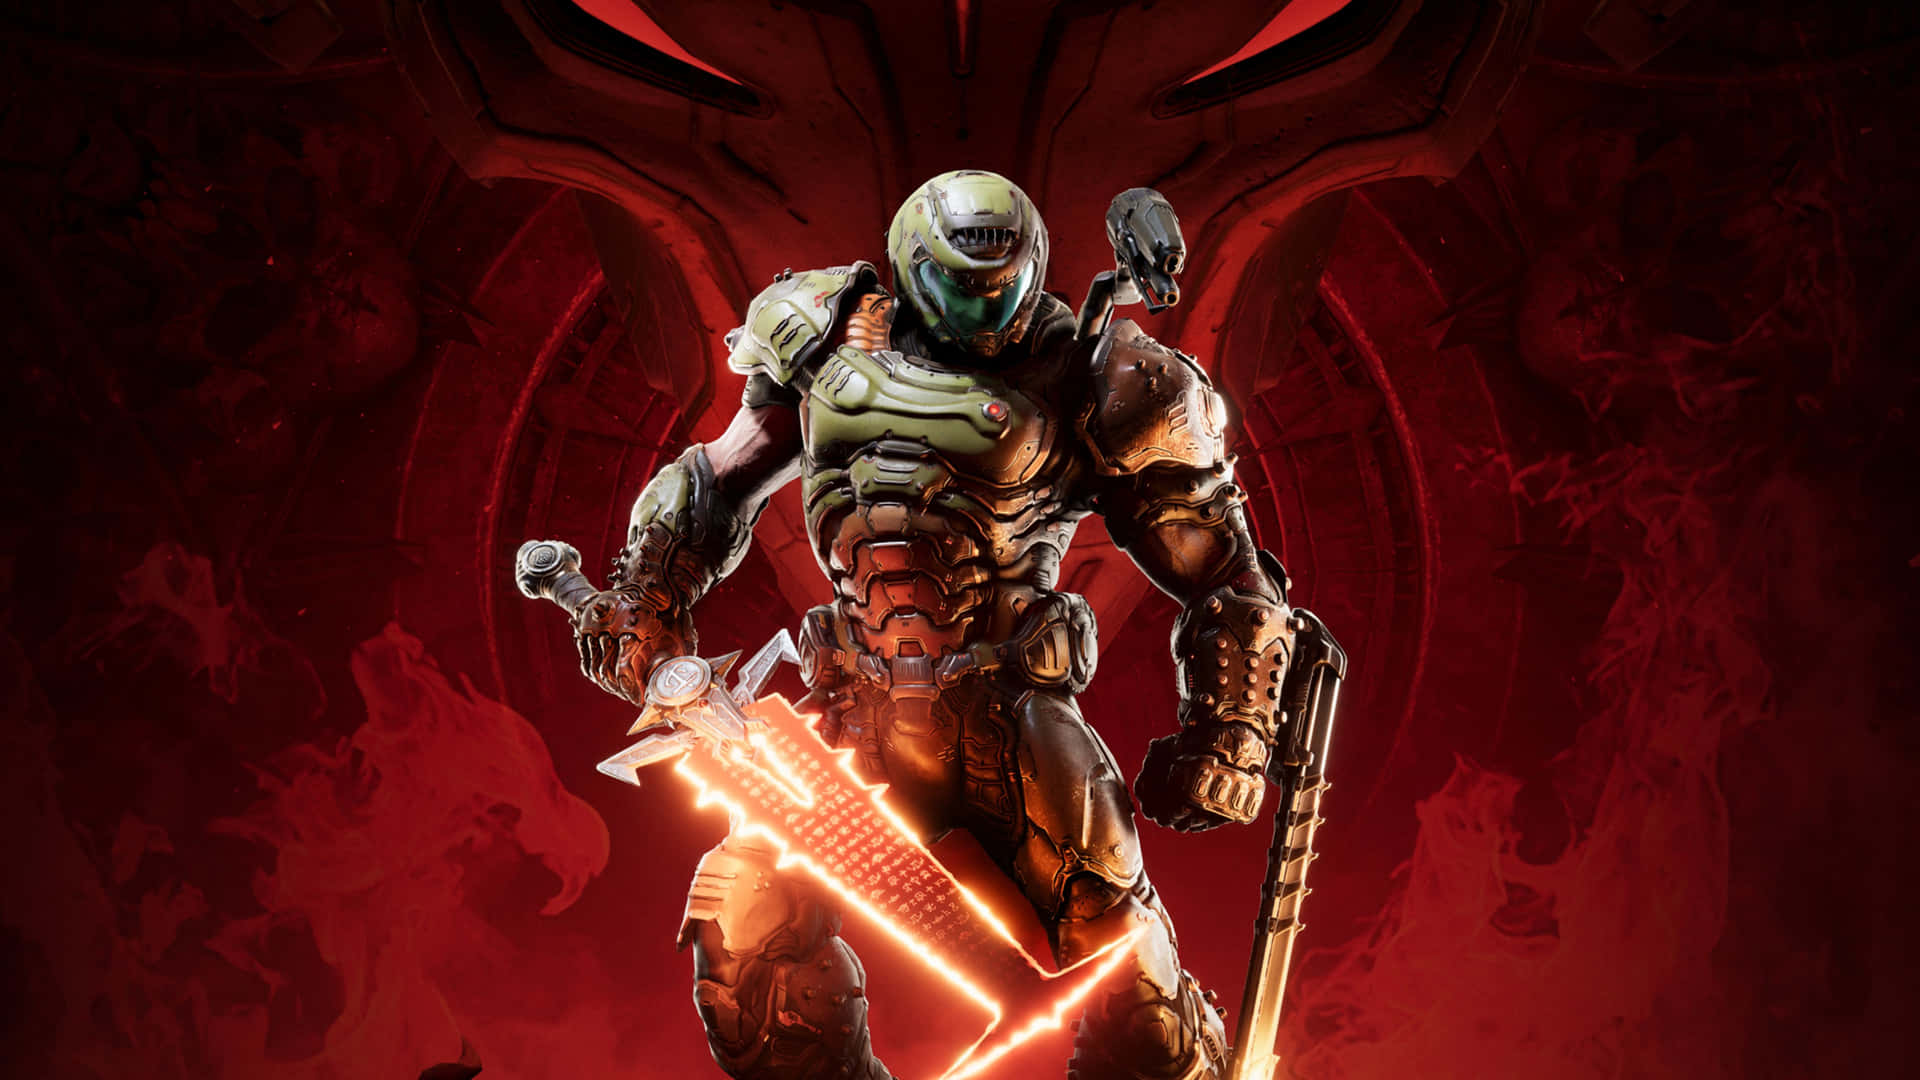 Doom - A Character With A Sword And A Red Light Background